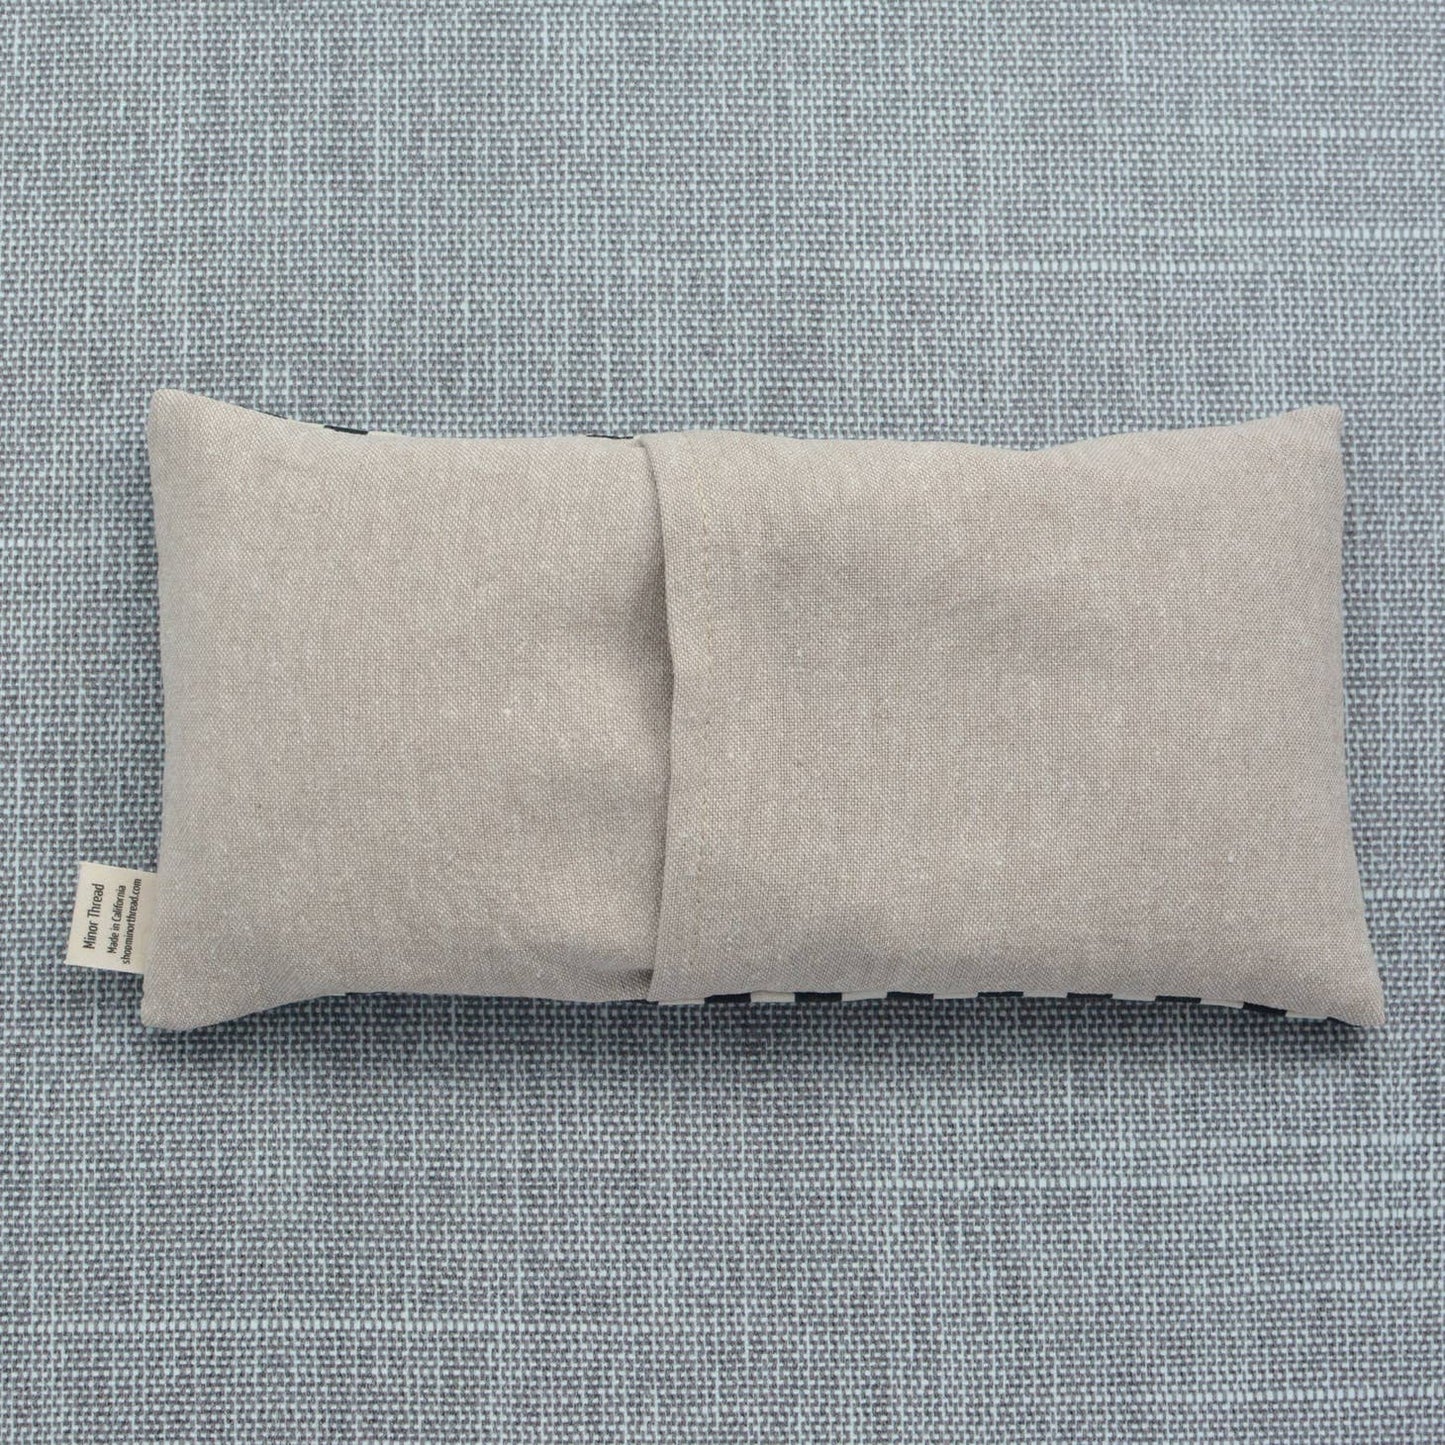 Weighted Eye Pillow - Black + White (Unscented)